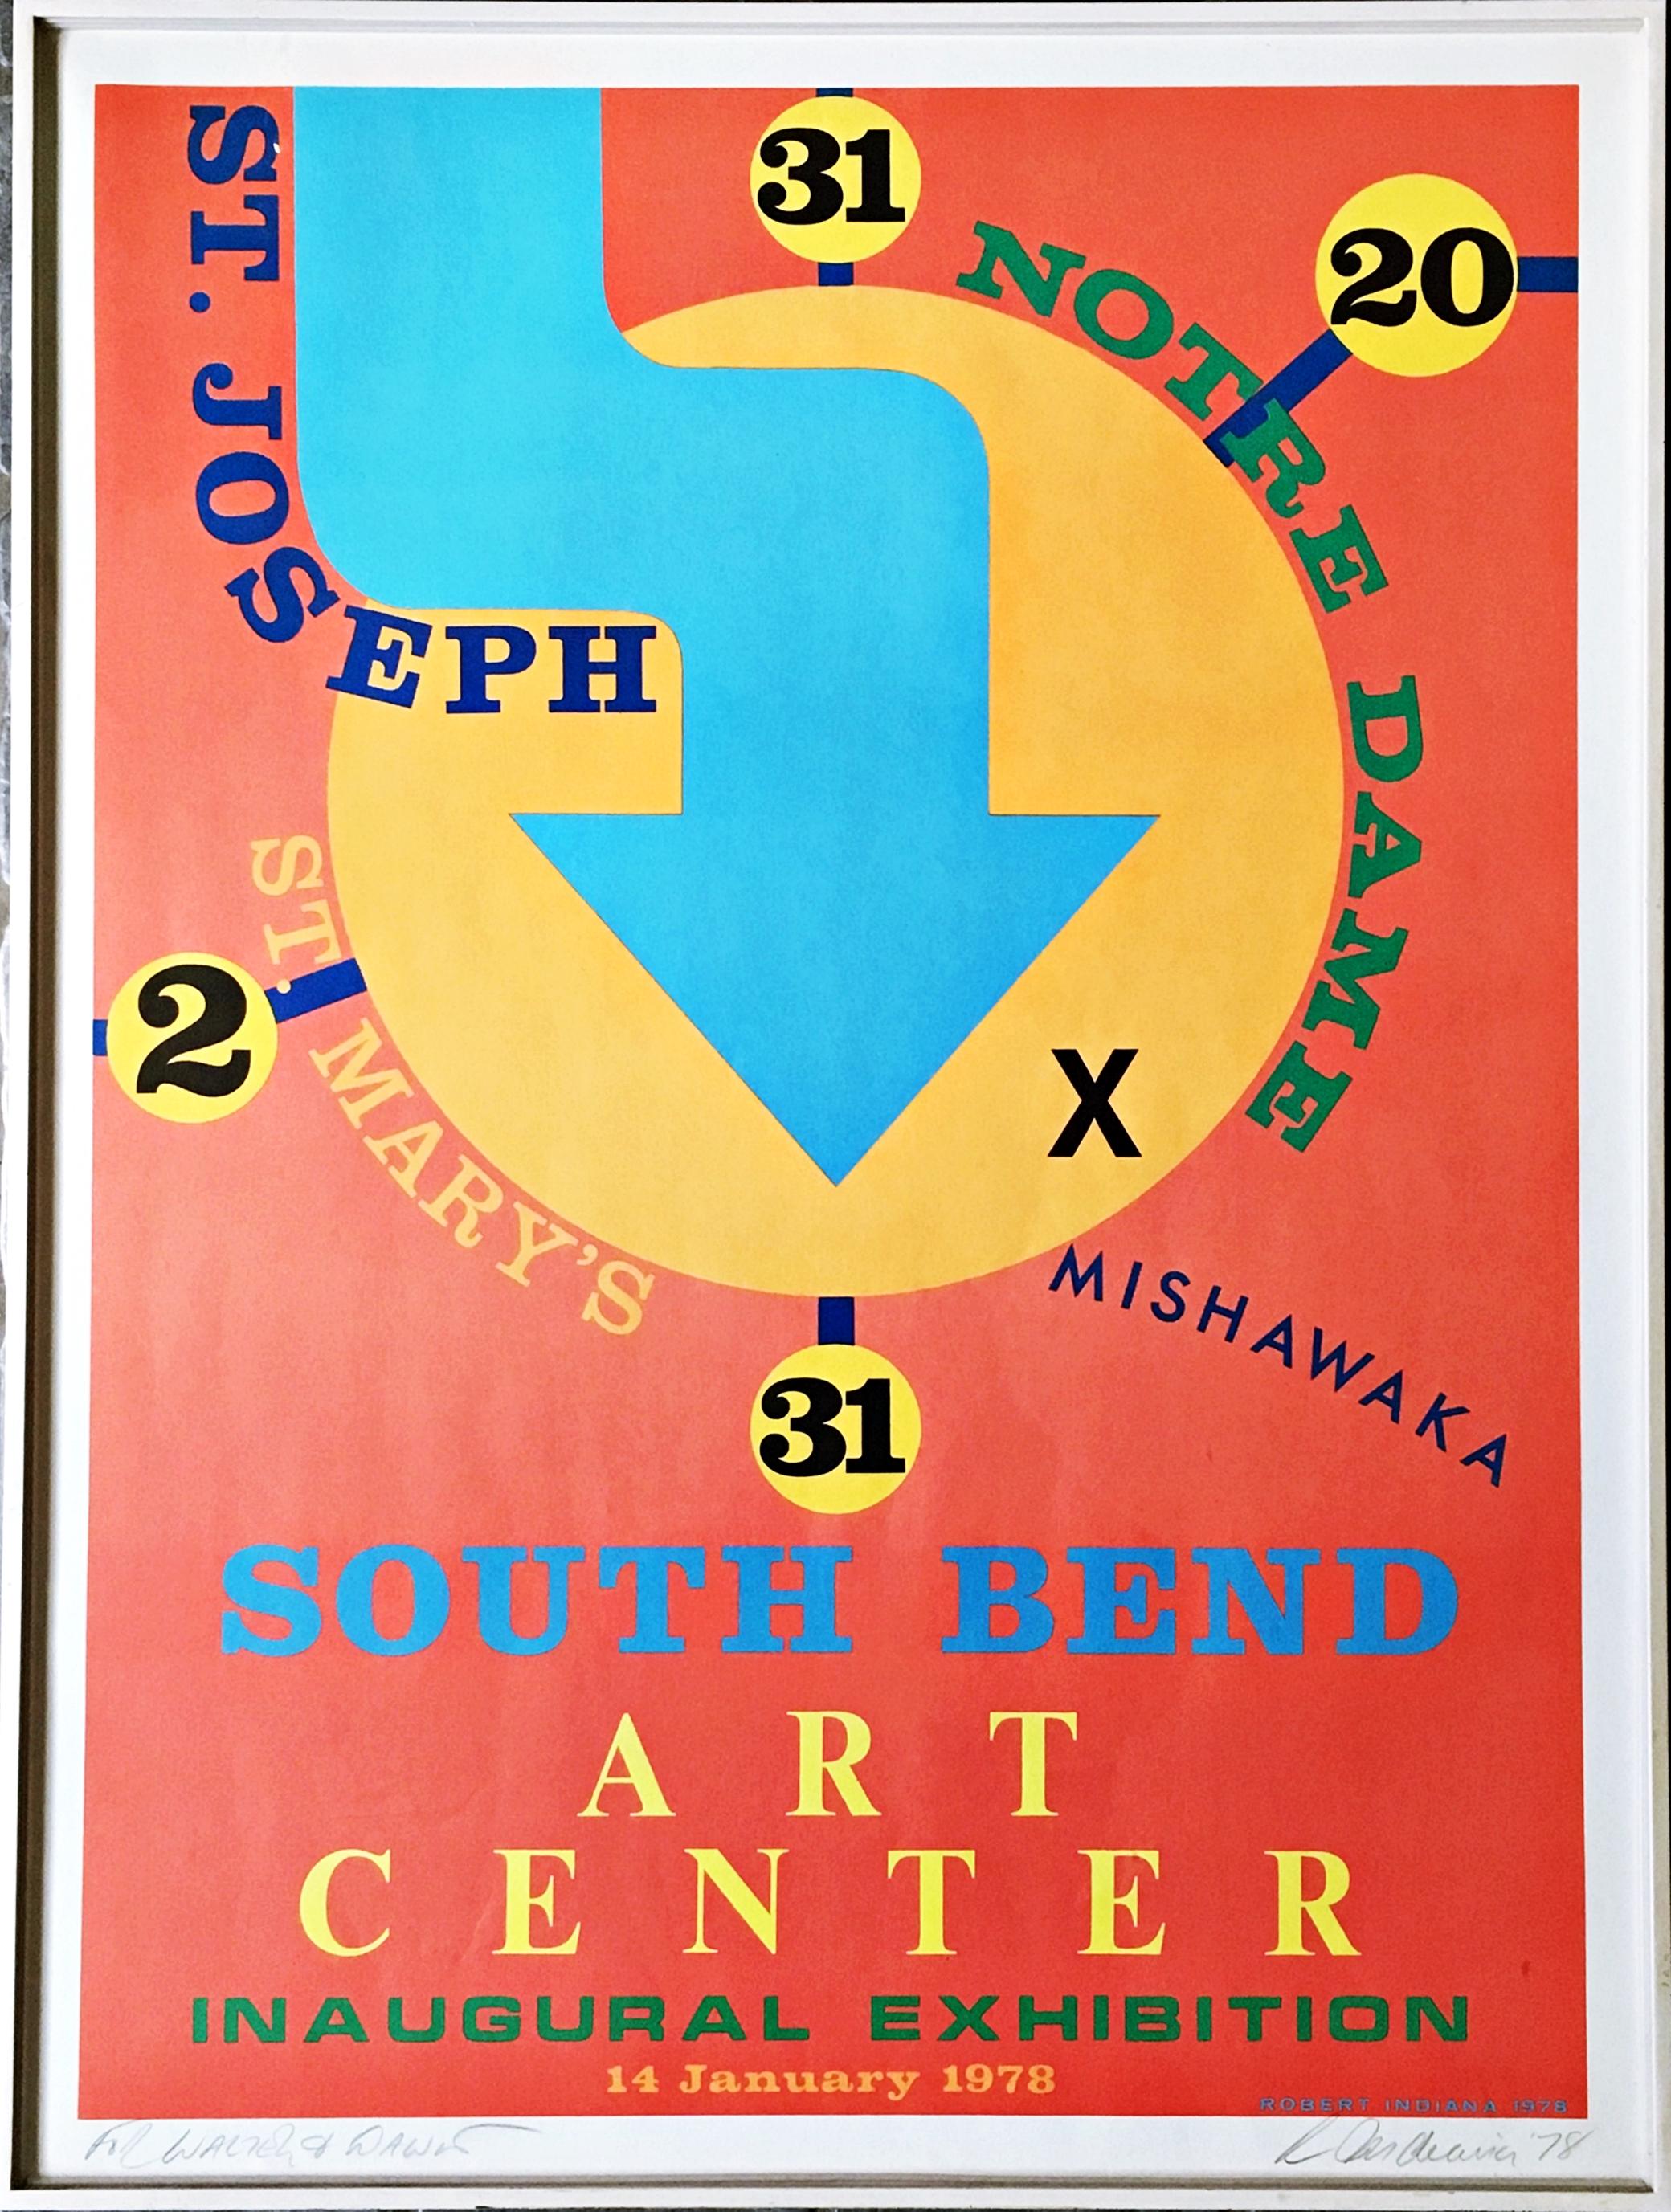 South Bend Art Center (Hand signed and inscribed) - Print by Robert Indiana